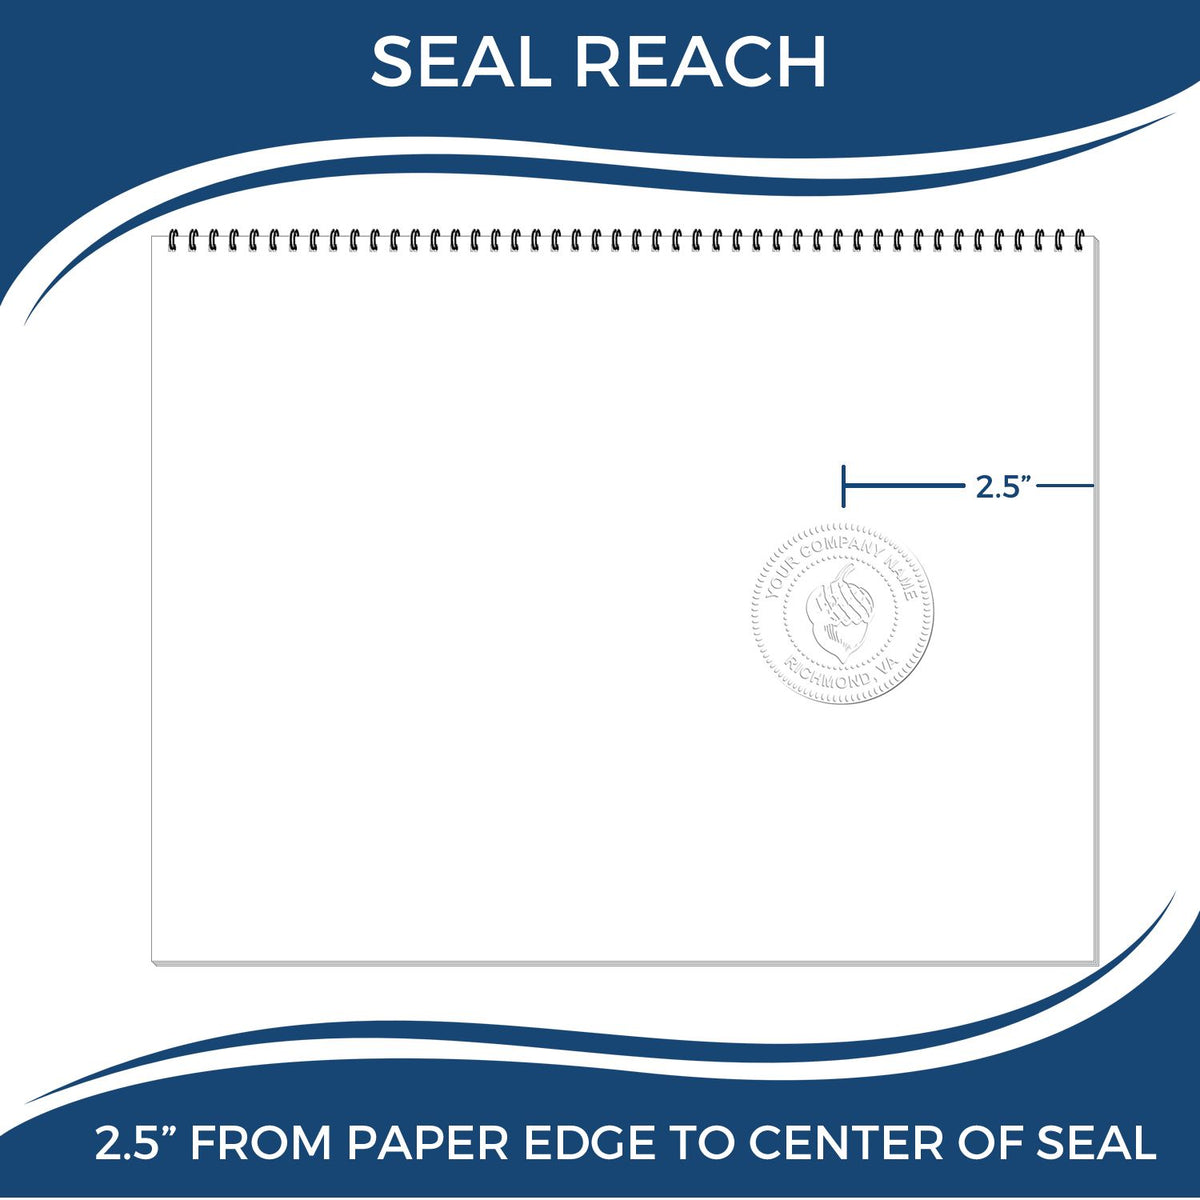 An infographic showing the seal reach which is represented by a ruler and a miniature seal image of the Heavy Duty Cast Iron Iowa Land Surveyor Seal Embosser